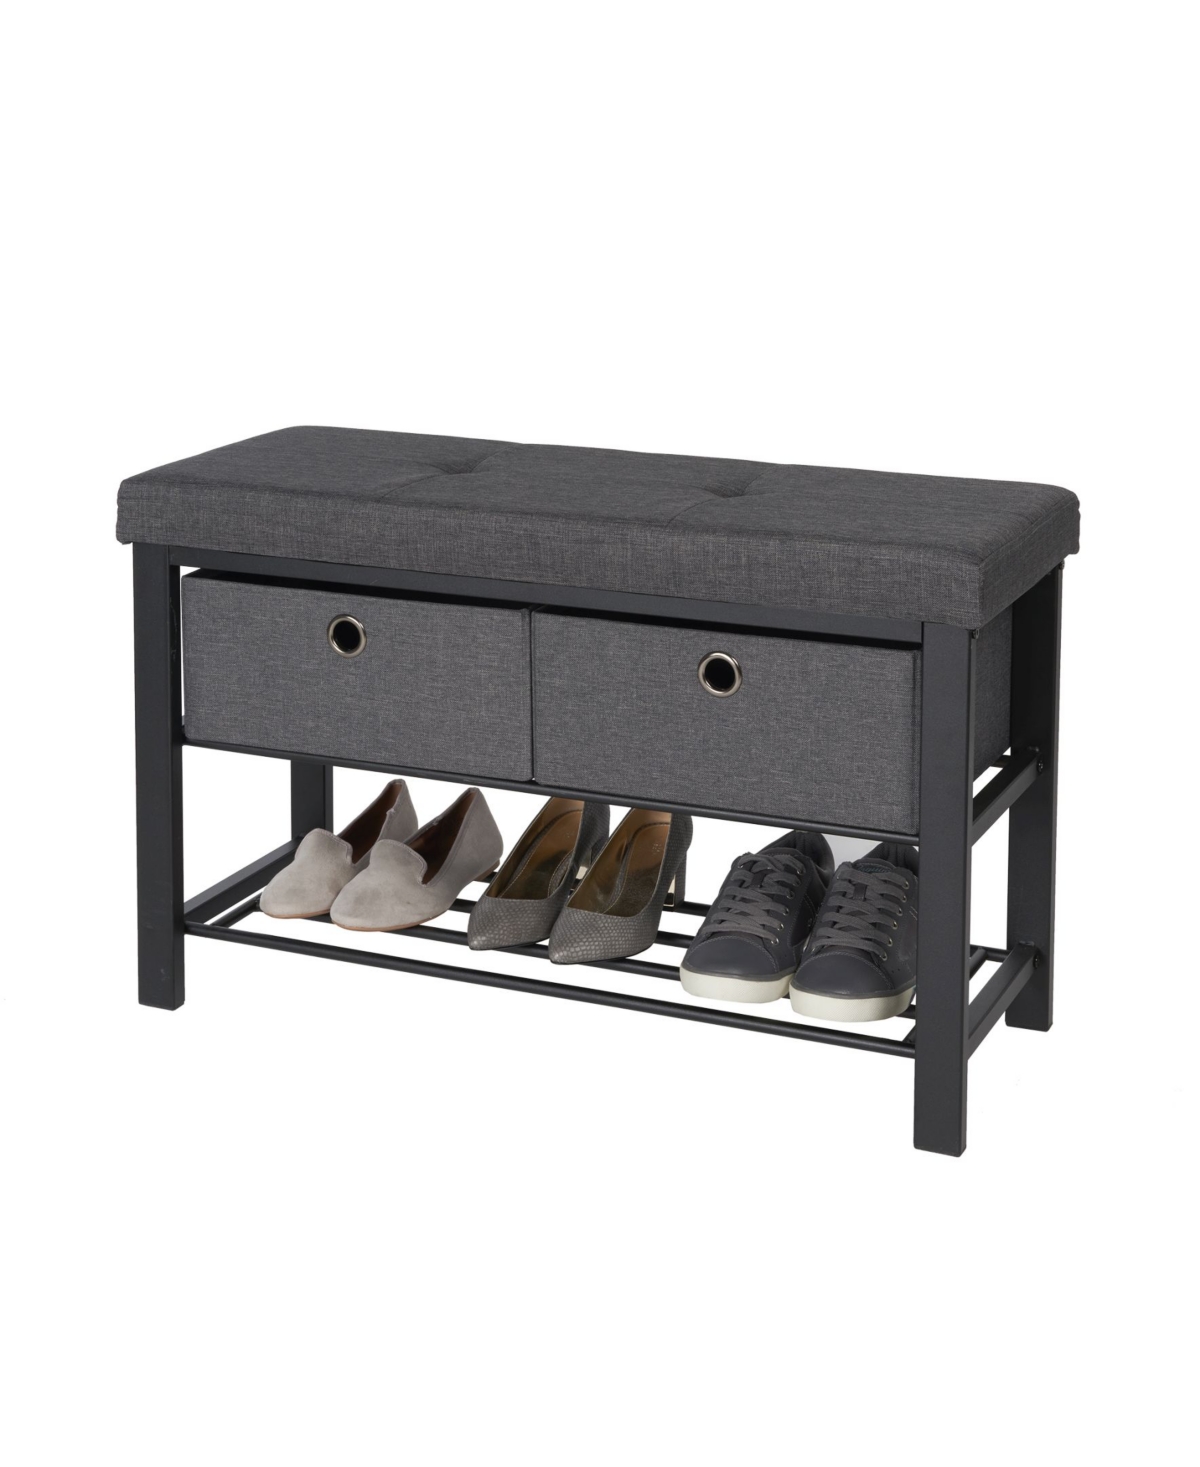 Cushioned Shoe Storage Bench with Drawers - Black, Anthracite